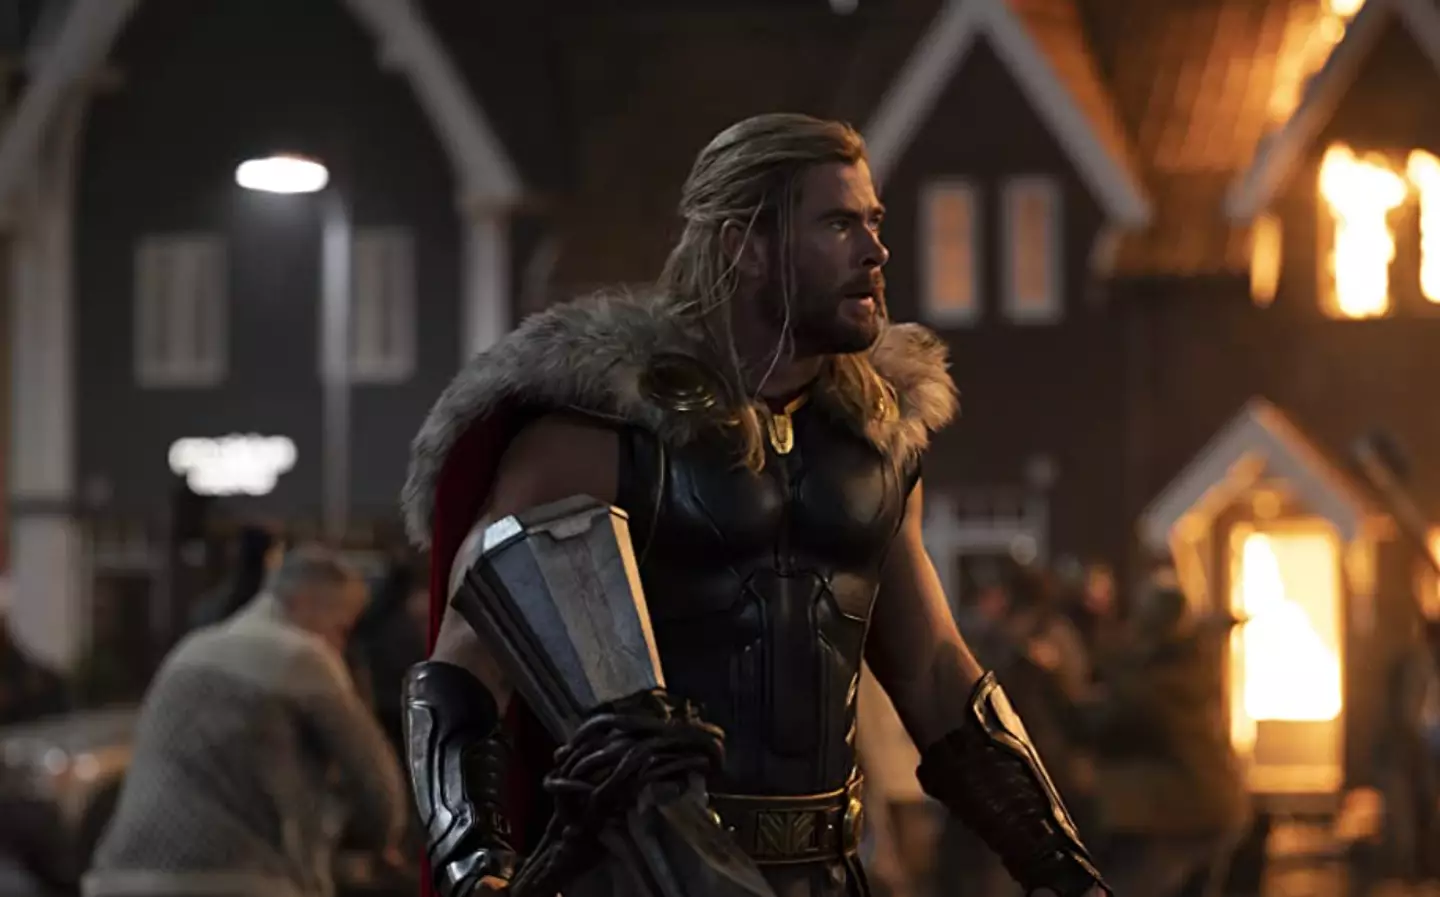 Some Marvel fans think Thor: Love and Thunder opened up a major plot hole.